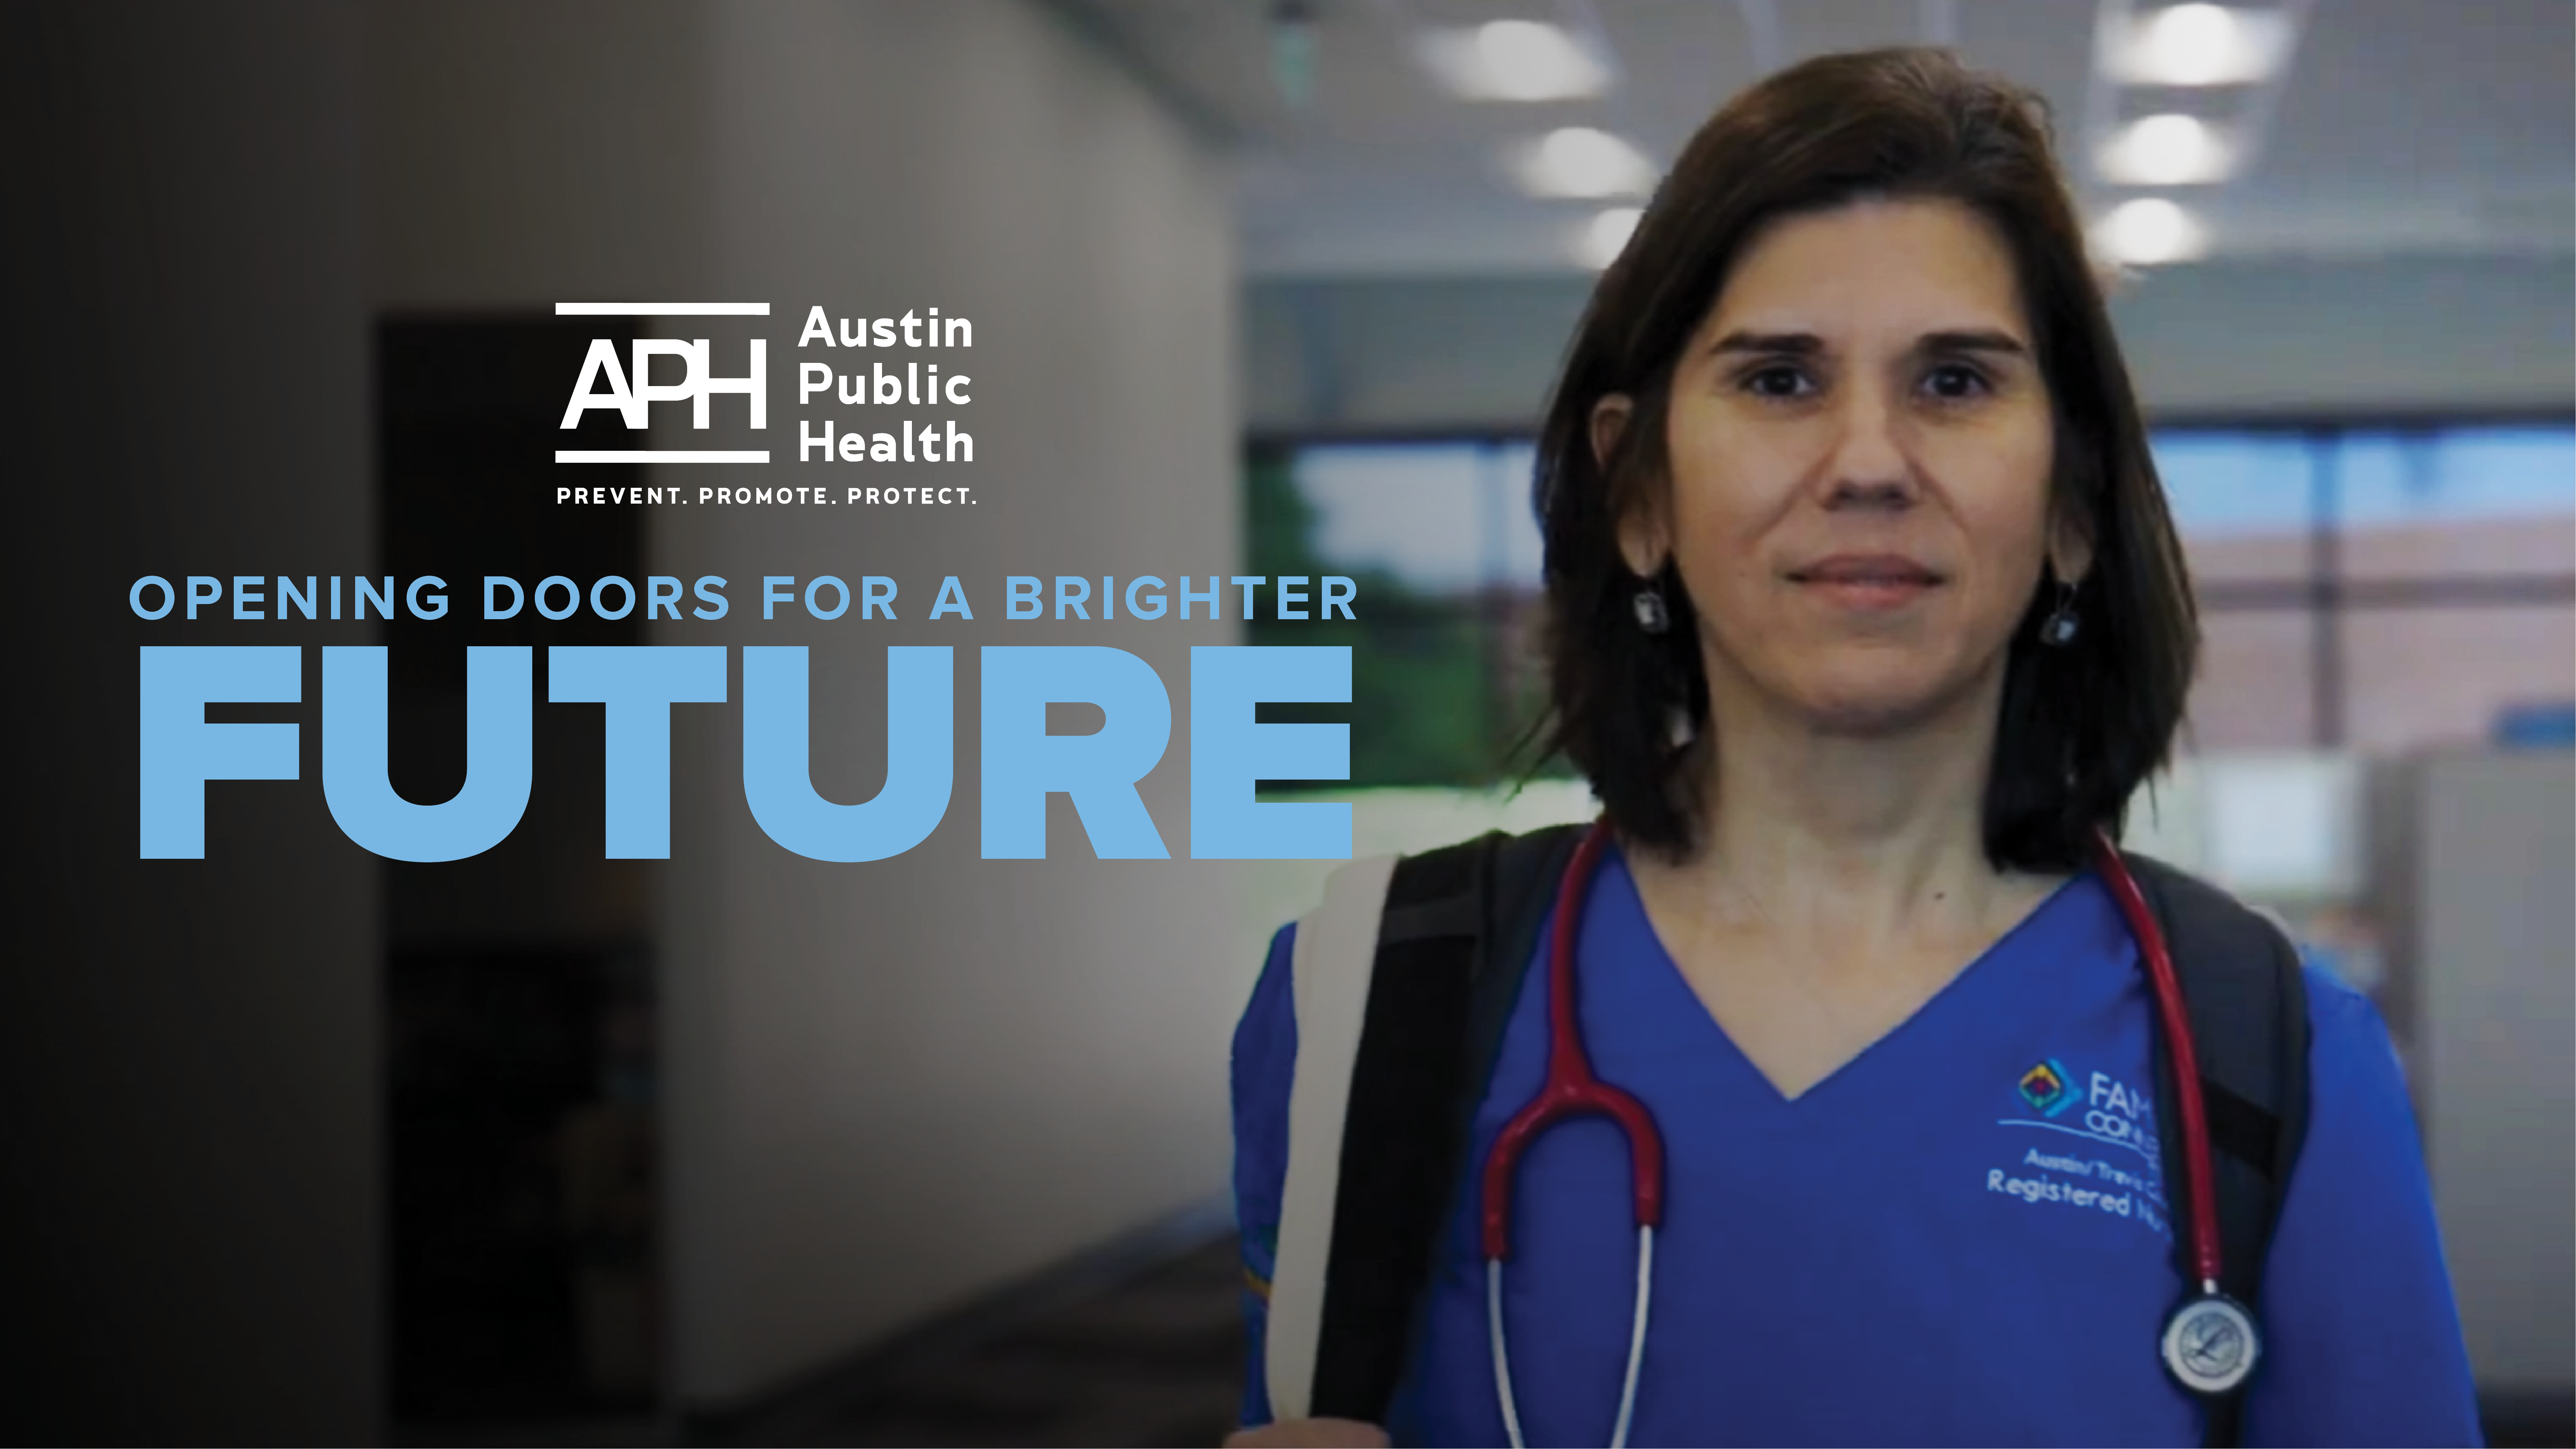 Austin Public Health Spotlights Staff and Services for National Public Health Week